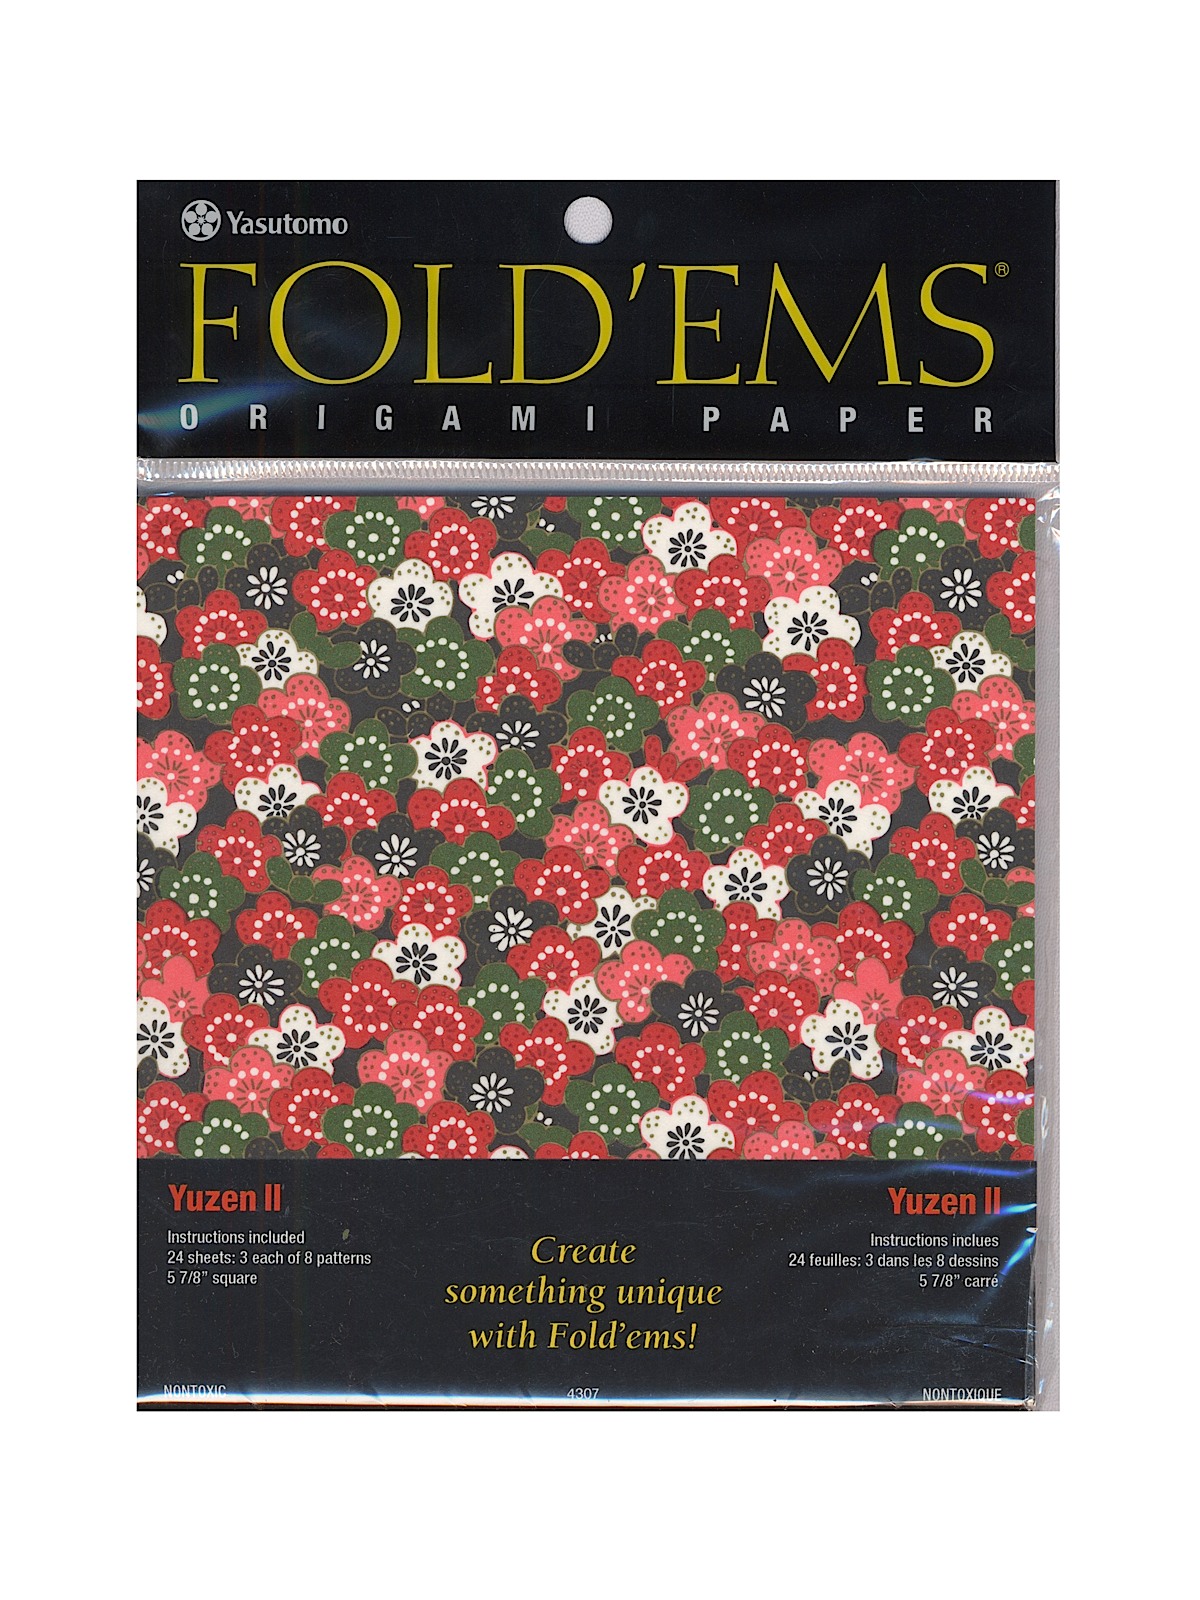 Fold'ems Origami Paper Yuzen II: 8 Patterns 5 7 8 In. Pack Of 24